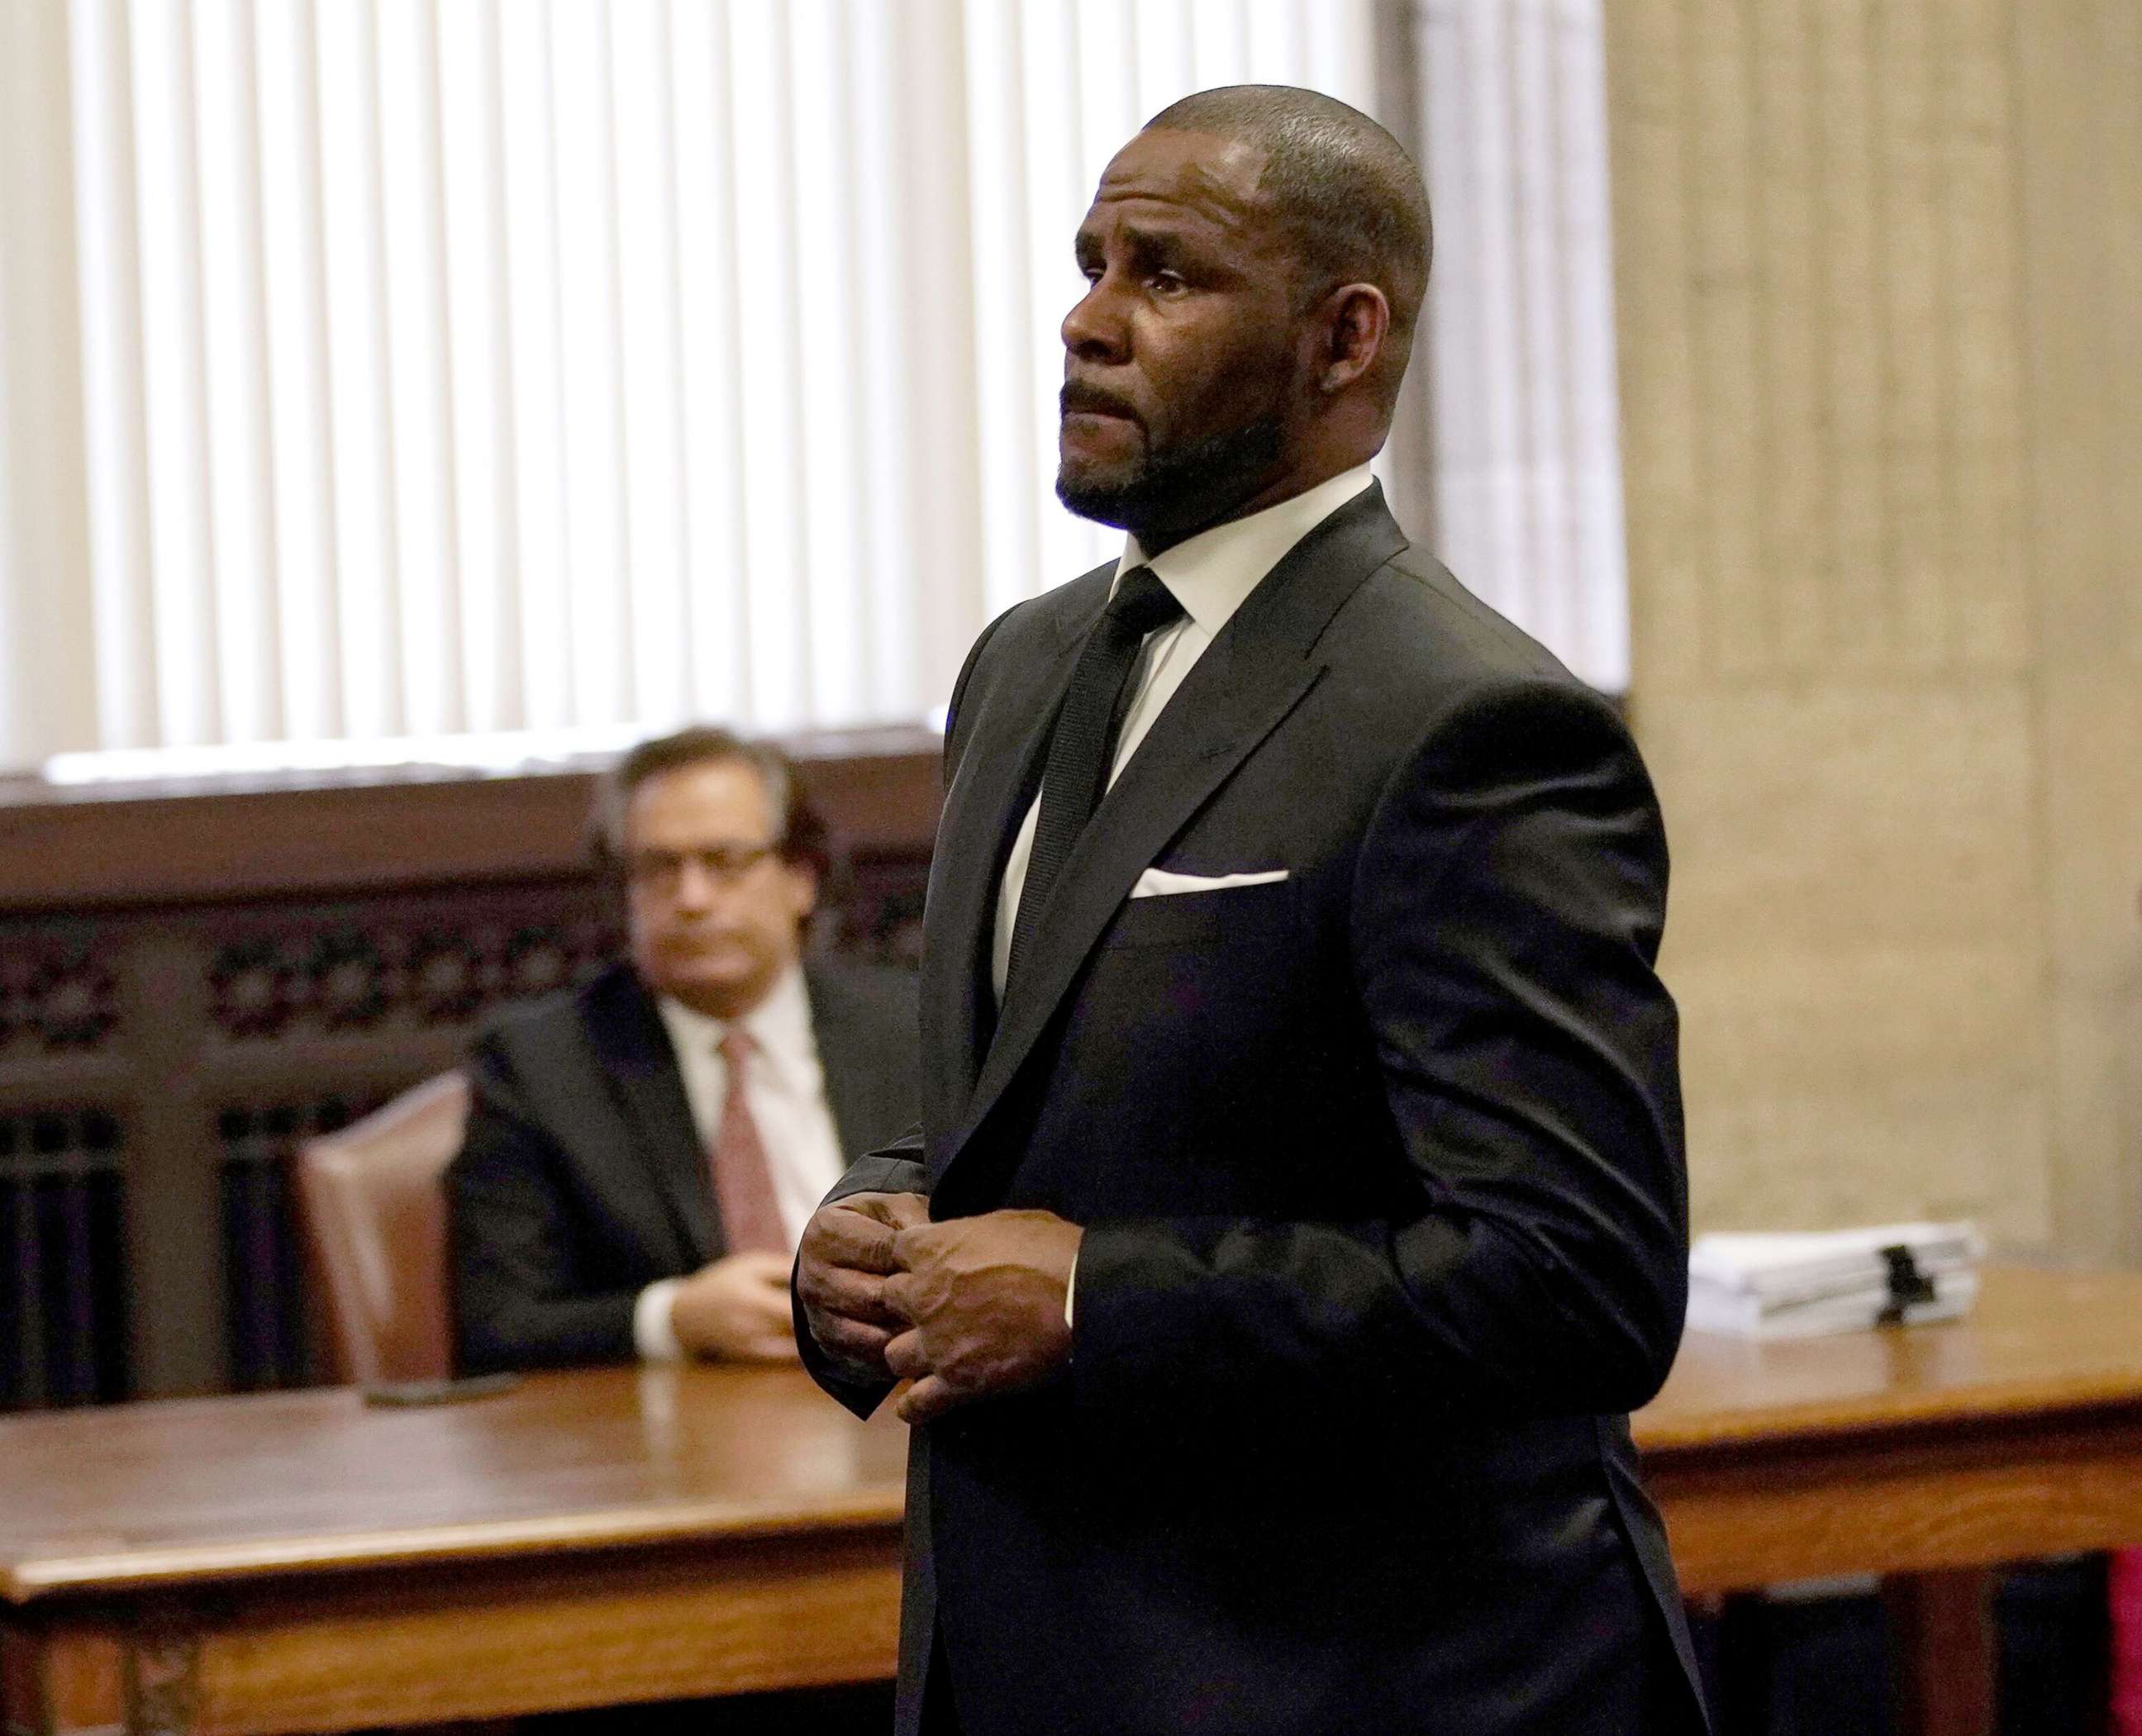 PHOTO: R. Kelly attends a hearing on his sex abuse case, in Chicago, March 22, 2019.